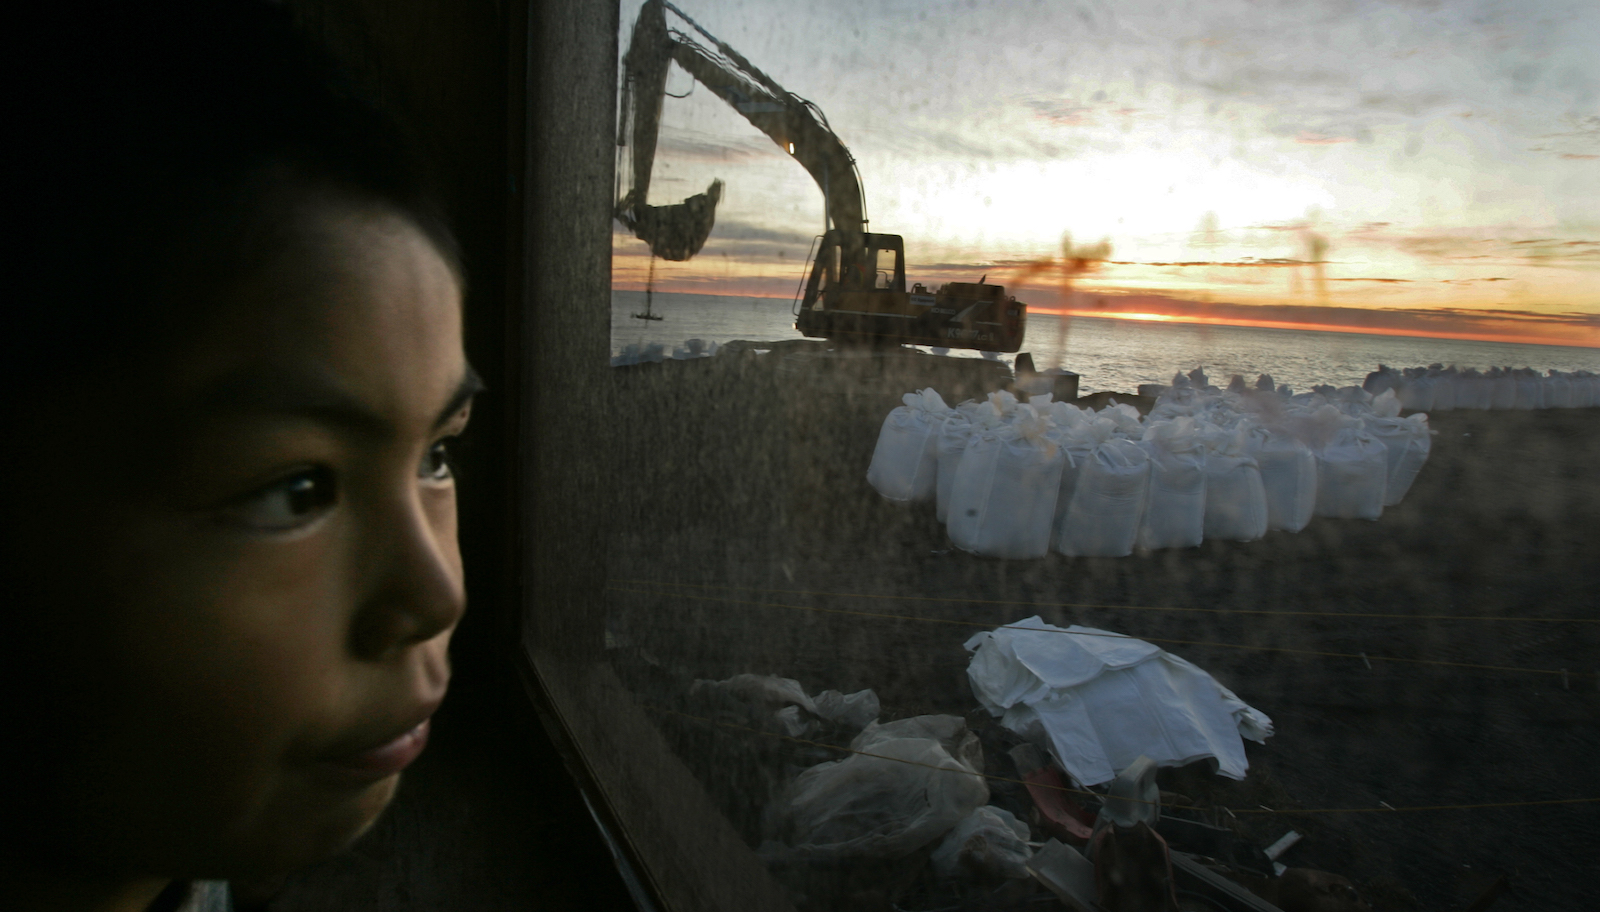 A boy watches workers fill sandbags for a seawall to shield his island from the Chukchi Sea.